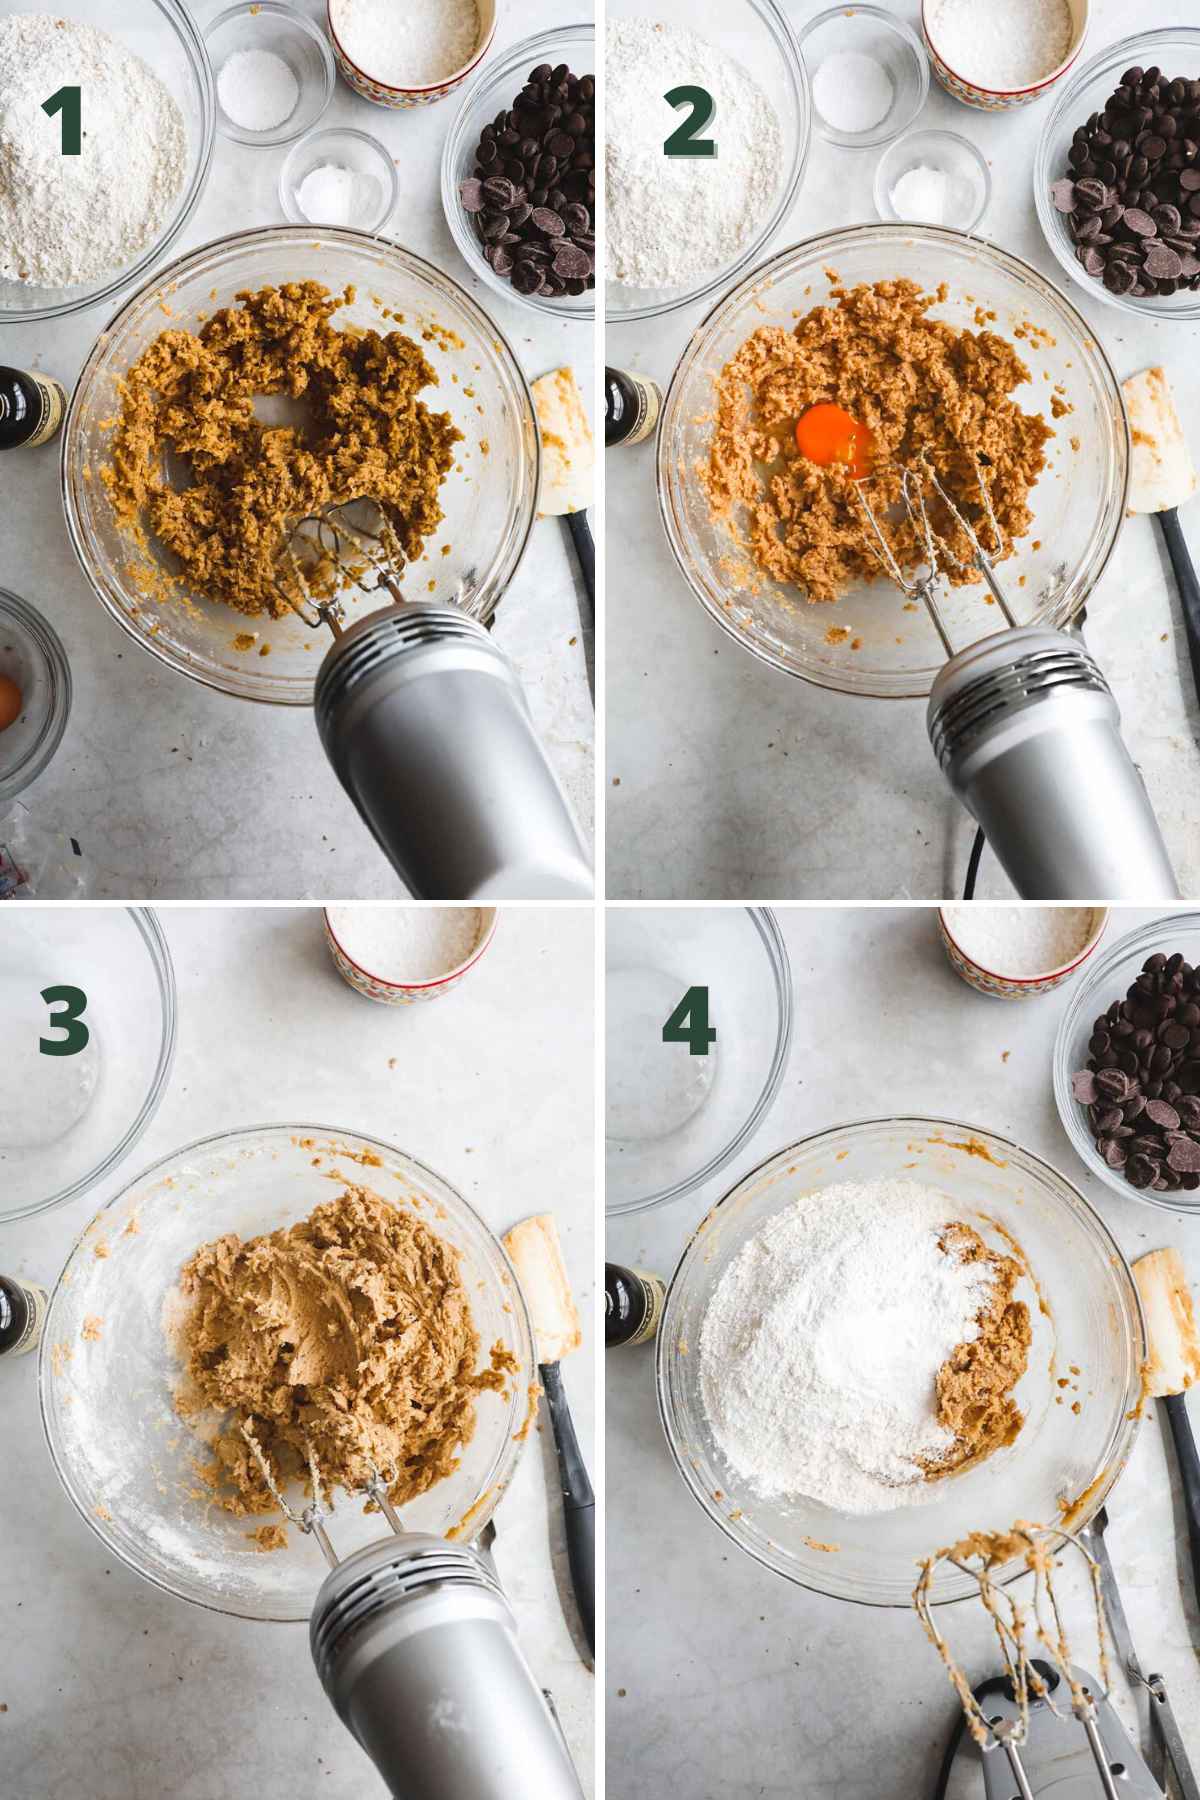 Steps to make giant bakery-style chocolate chip cookies, including making the dough with flour, eggs, vanilla, sugar, and brown sugar with a mixer.